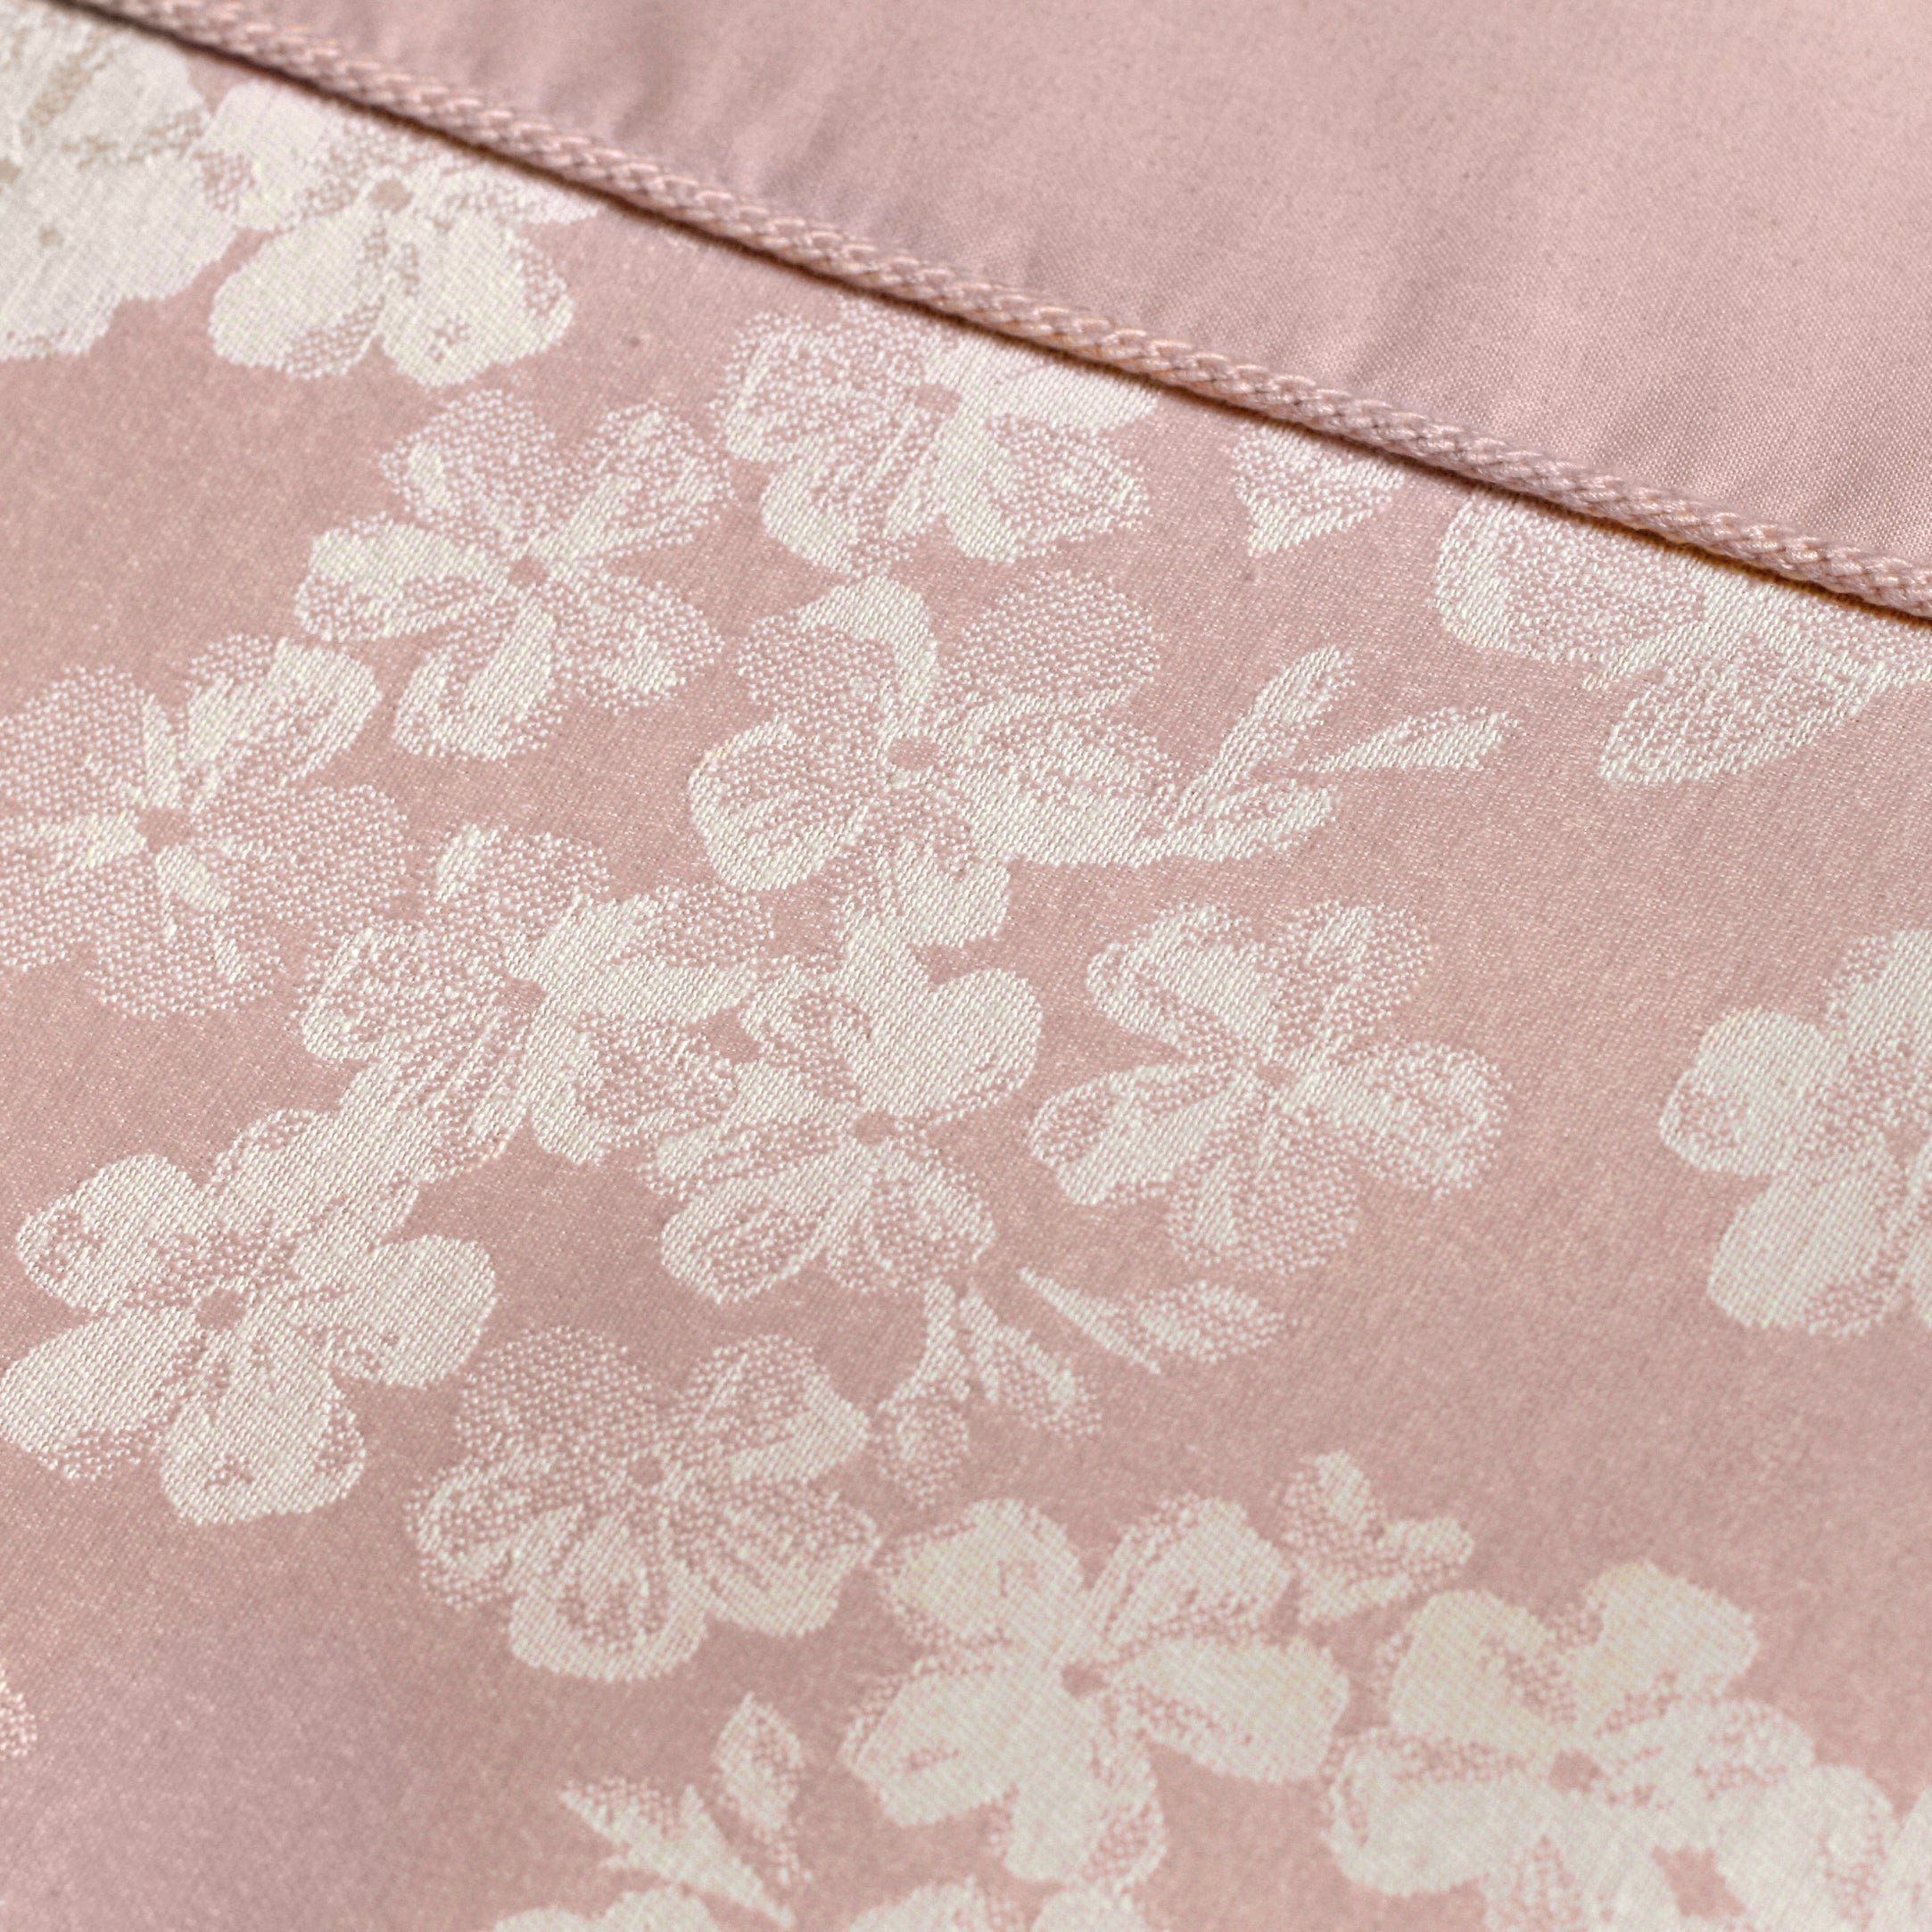 Blossom - Jacquard Bedding Set, Curtains & Cushions in Blush - by D&D Woven